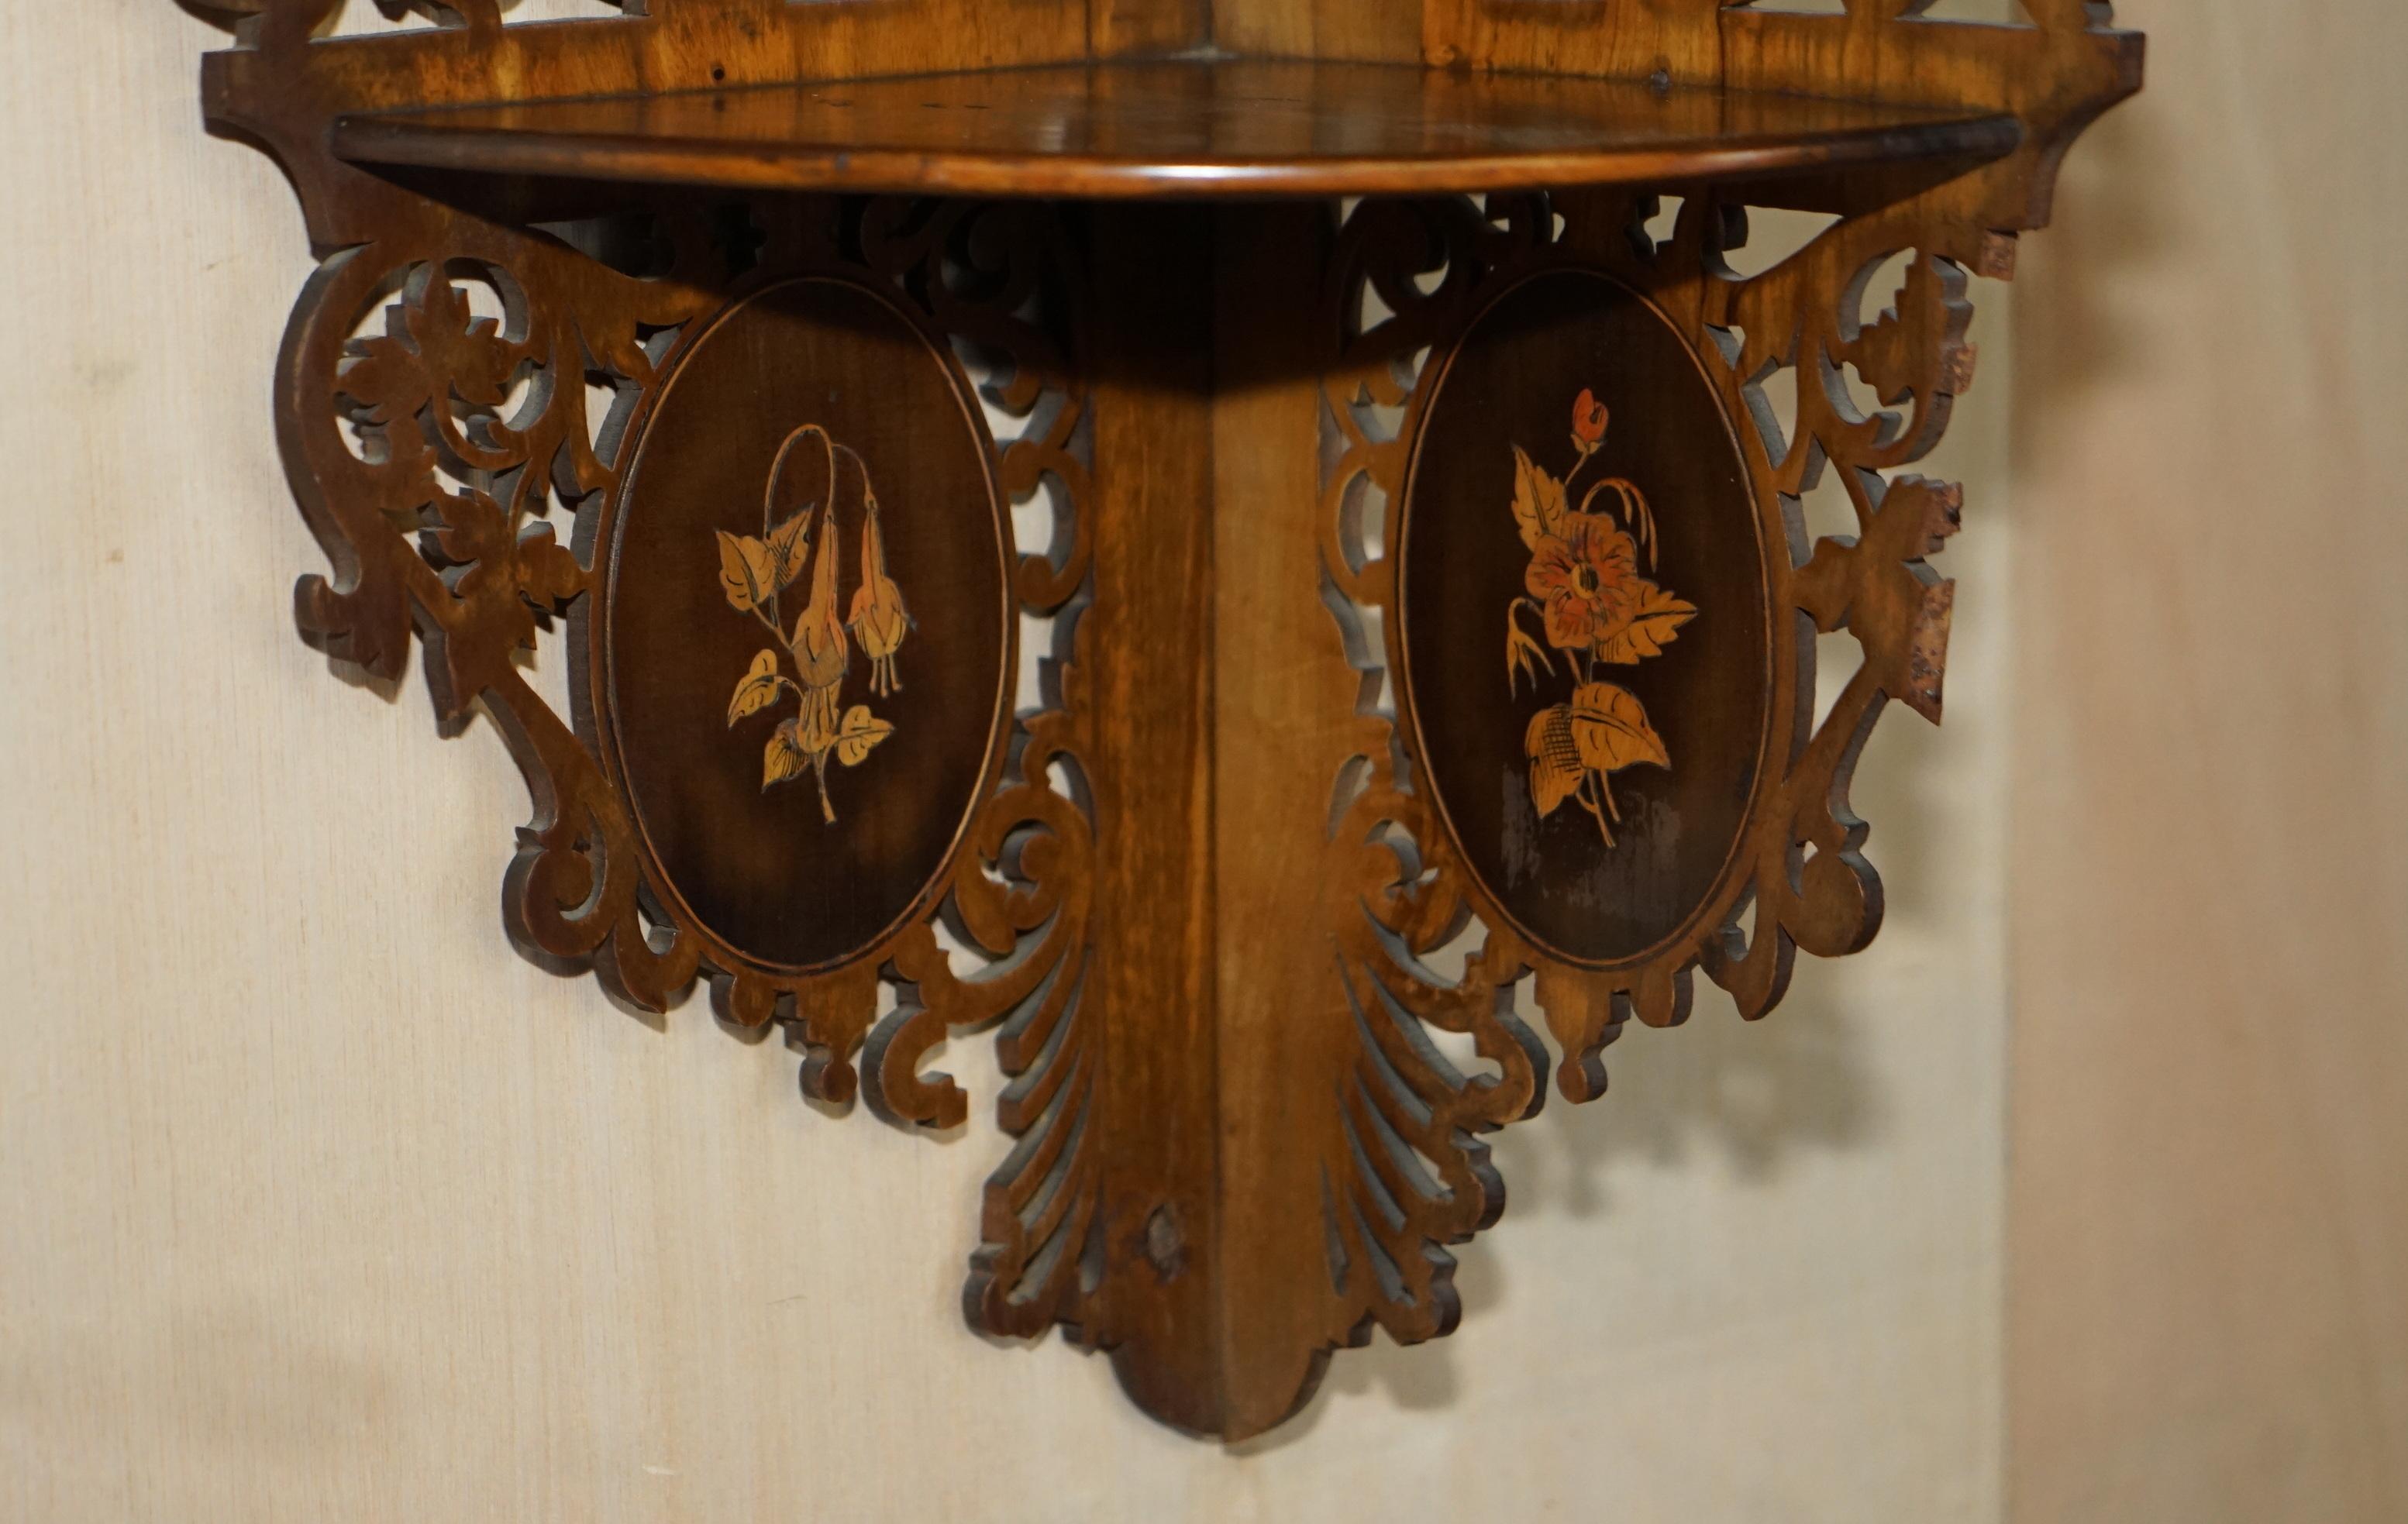 Italian Antique Hand Carved Inlaid Hardwood and Walnut Hanging Corner Shelf for Trinkets For Sale